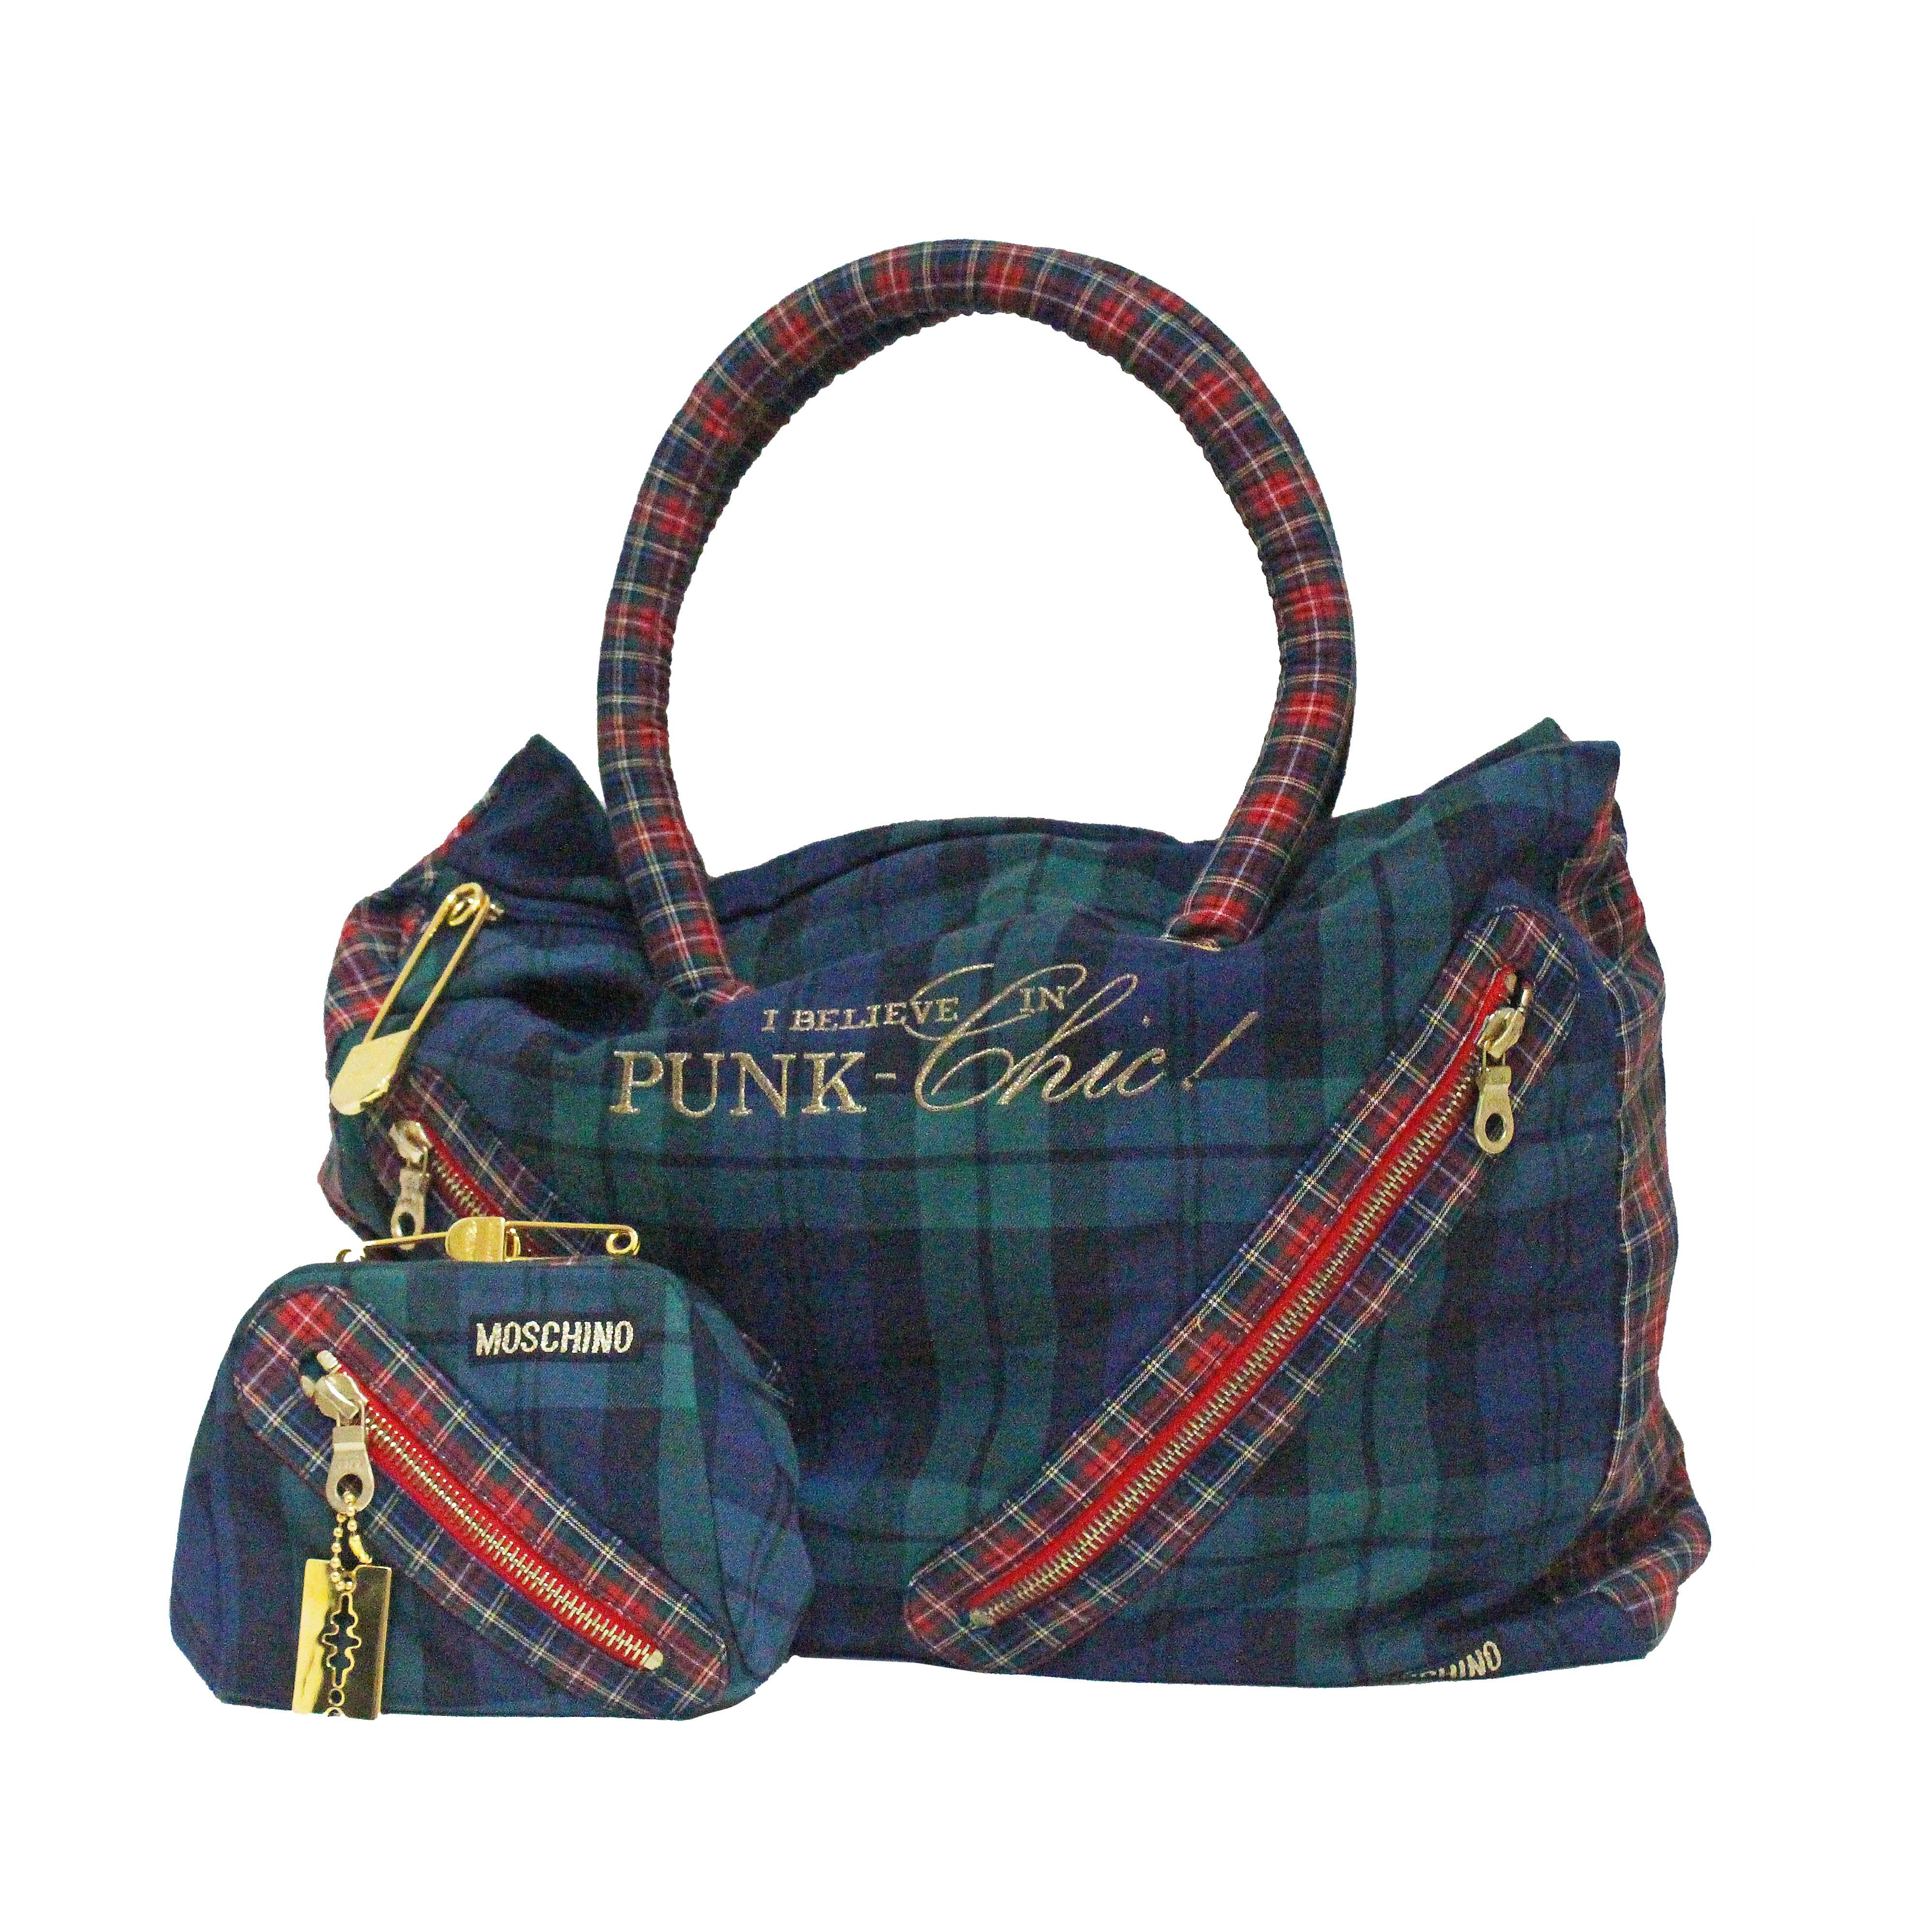 Moschino tartan Punk Chic! large tote bag with purse, c. 1990s 